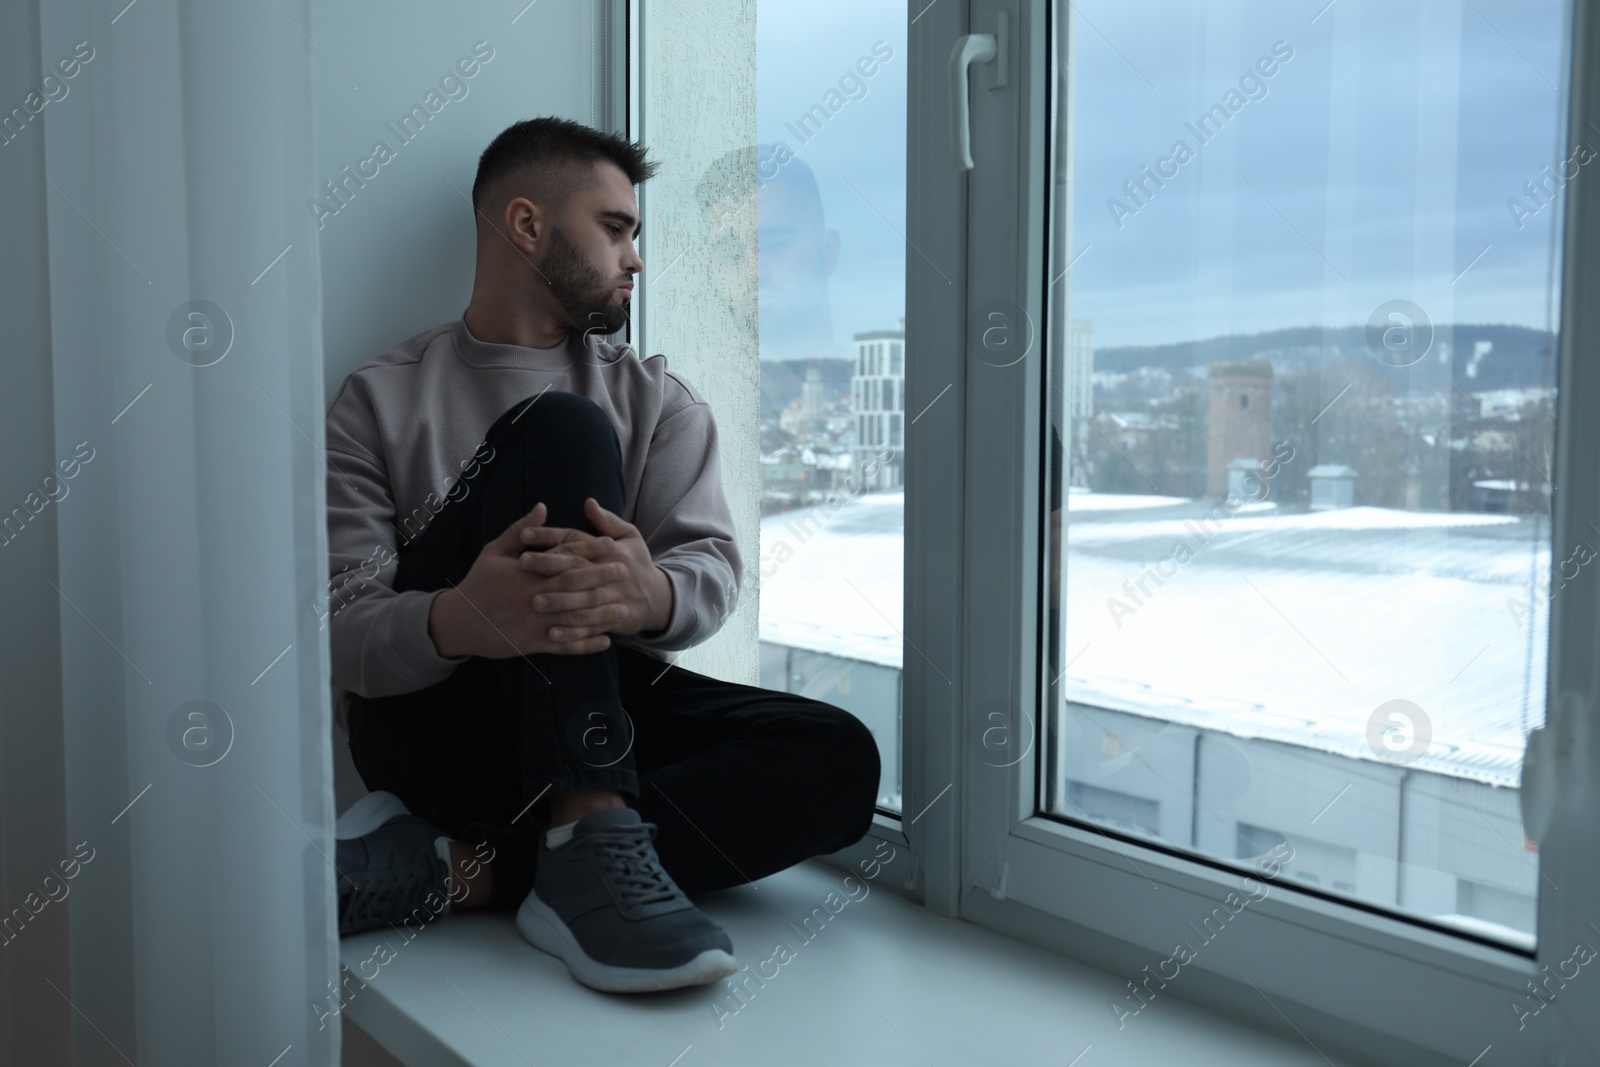 Photo of Sad man sitting on sill and looking at window indoors